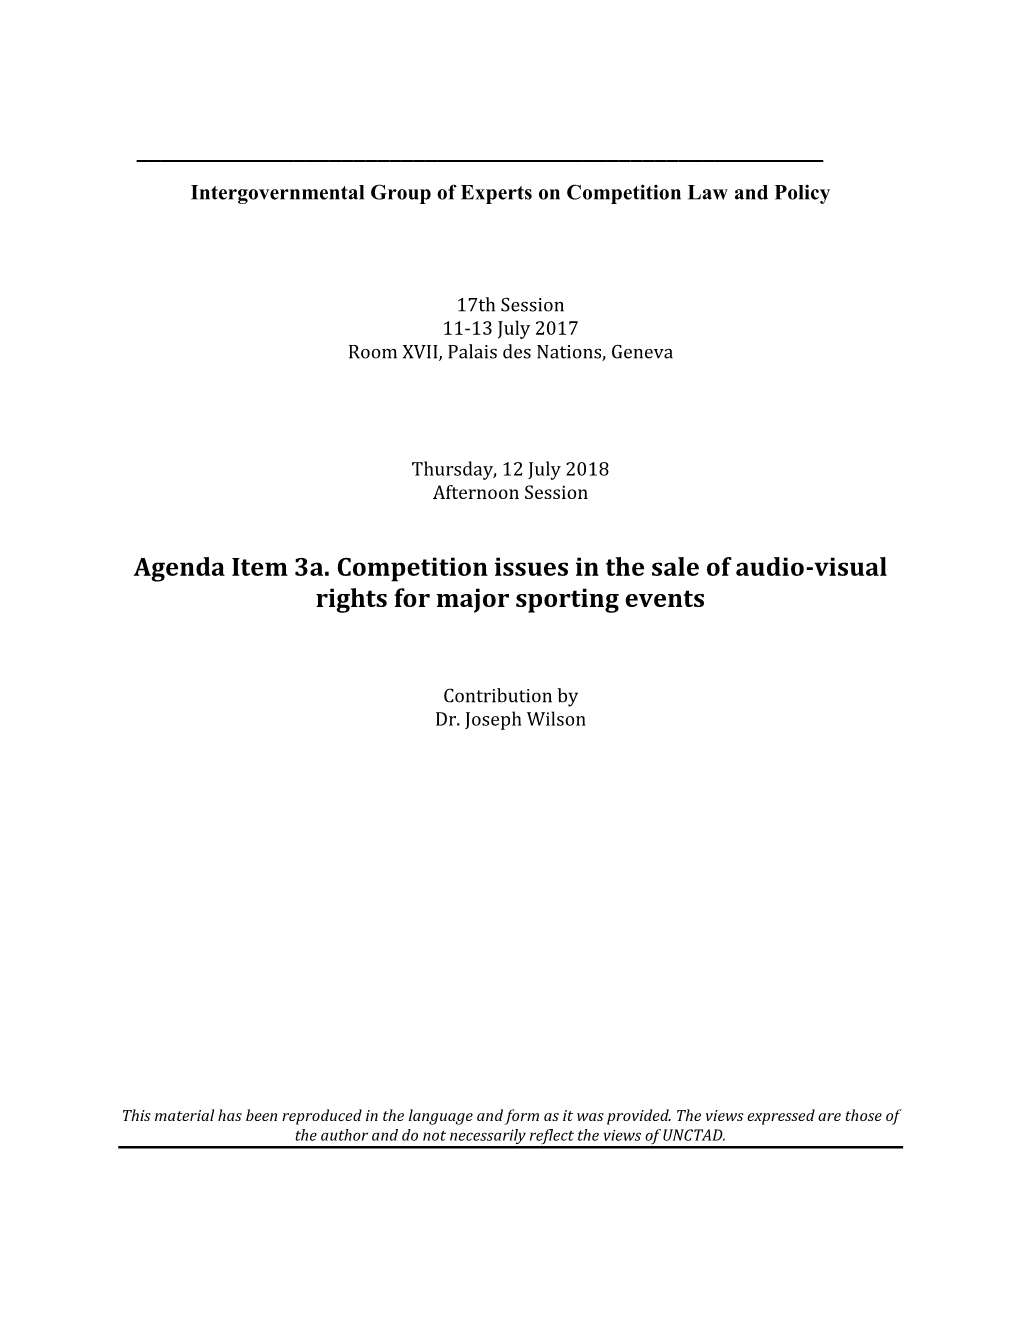 Agenda Item 3A. Competition Issues in the Sale of Audio-Visual Rights for Major Sporting Events